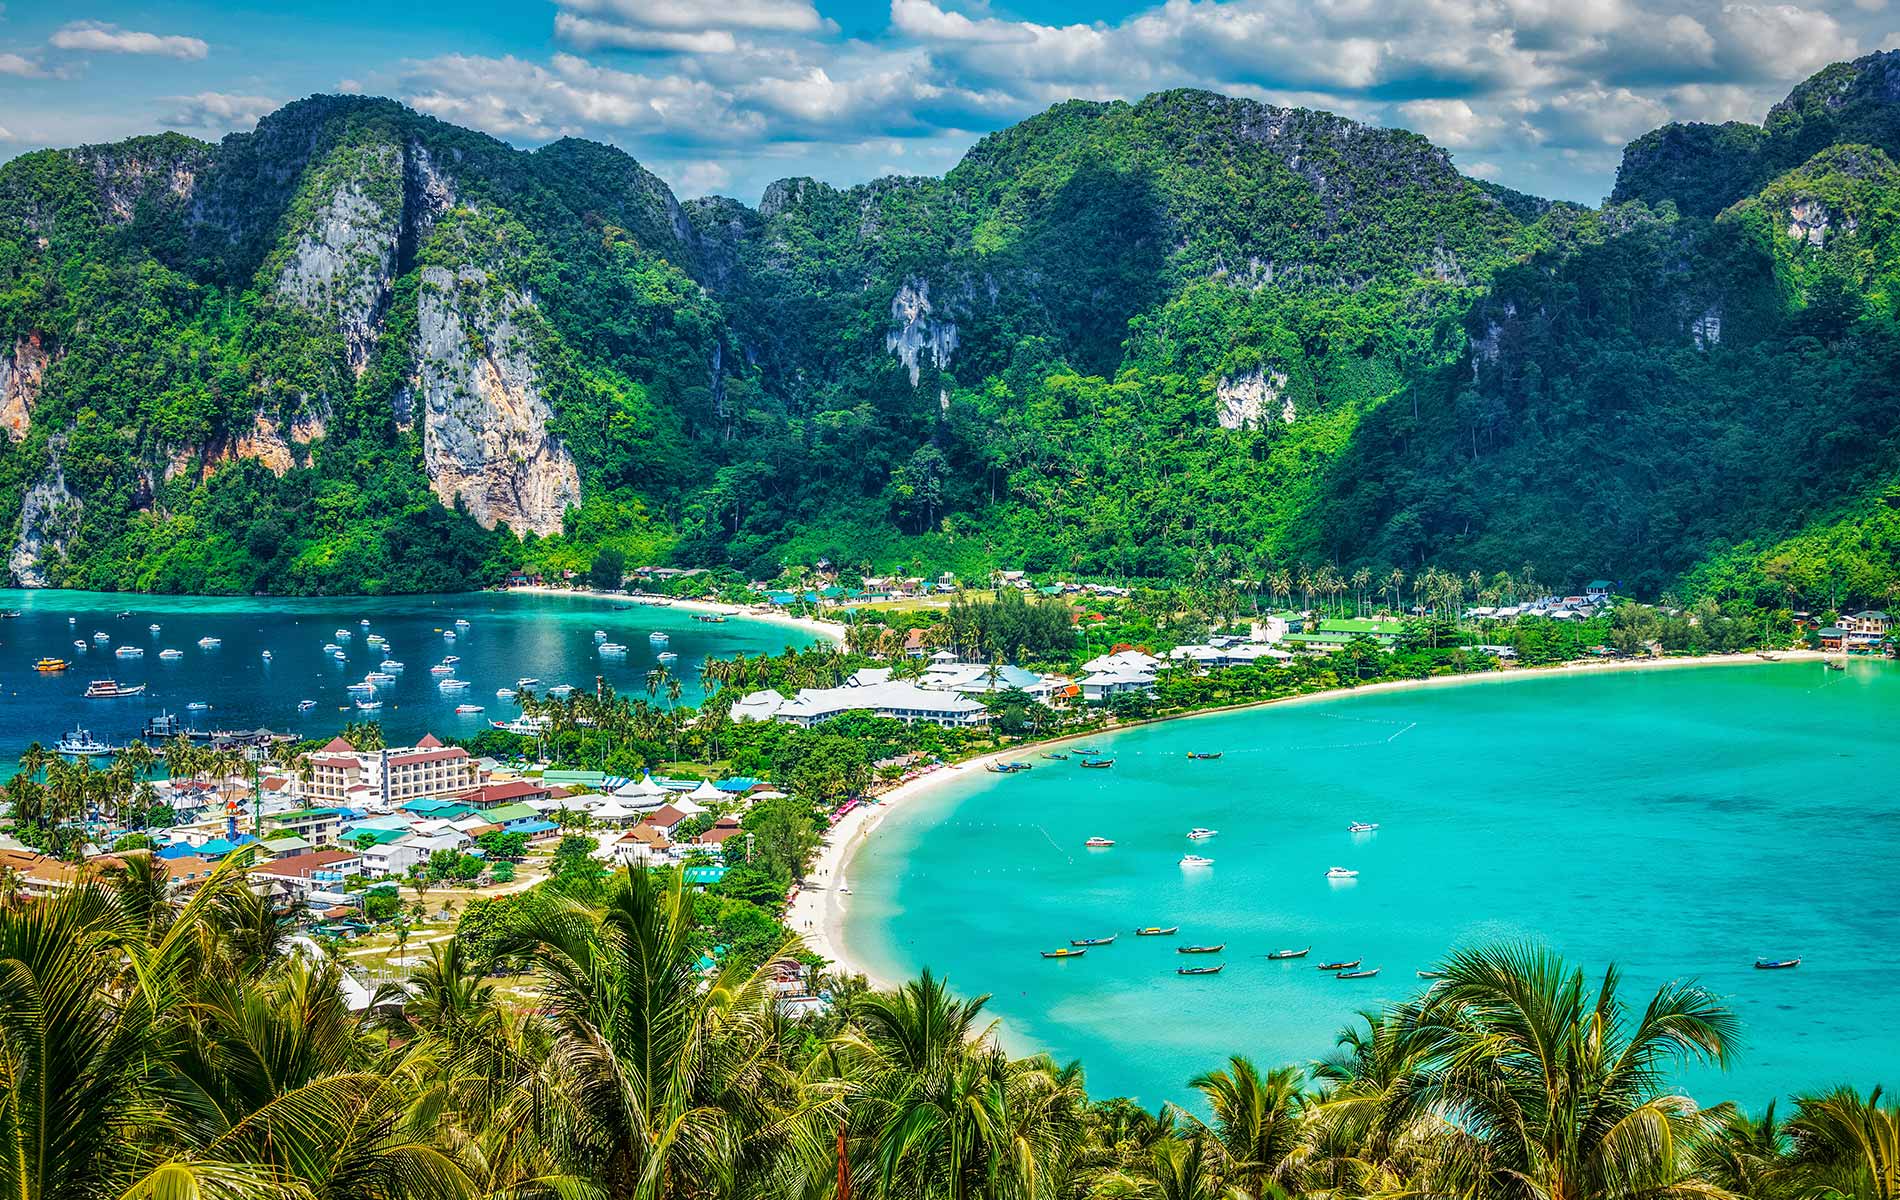 Bird's eye view of the tropical Phi Phi Islands in Thailand’s favorite Krabi Province